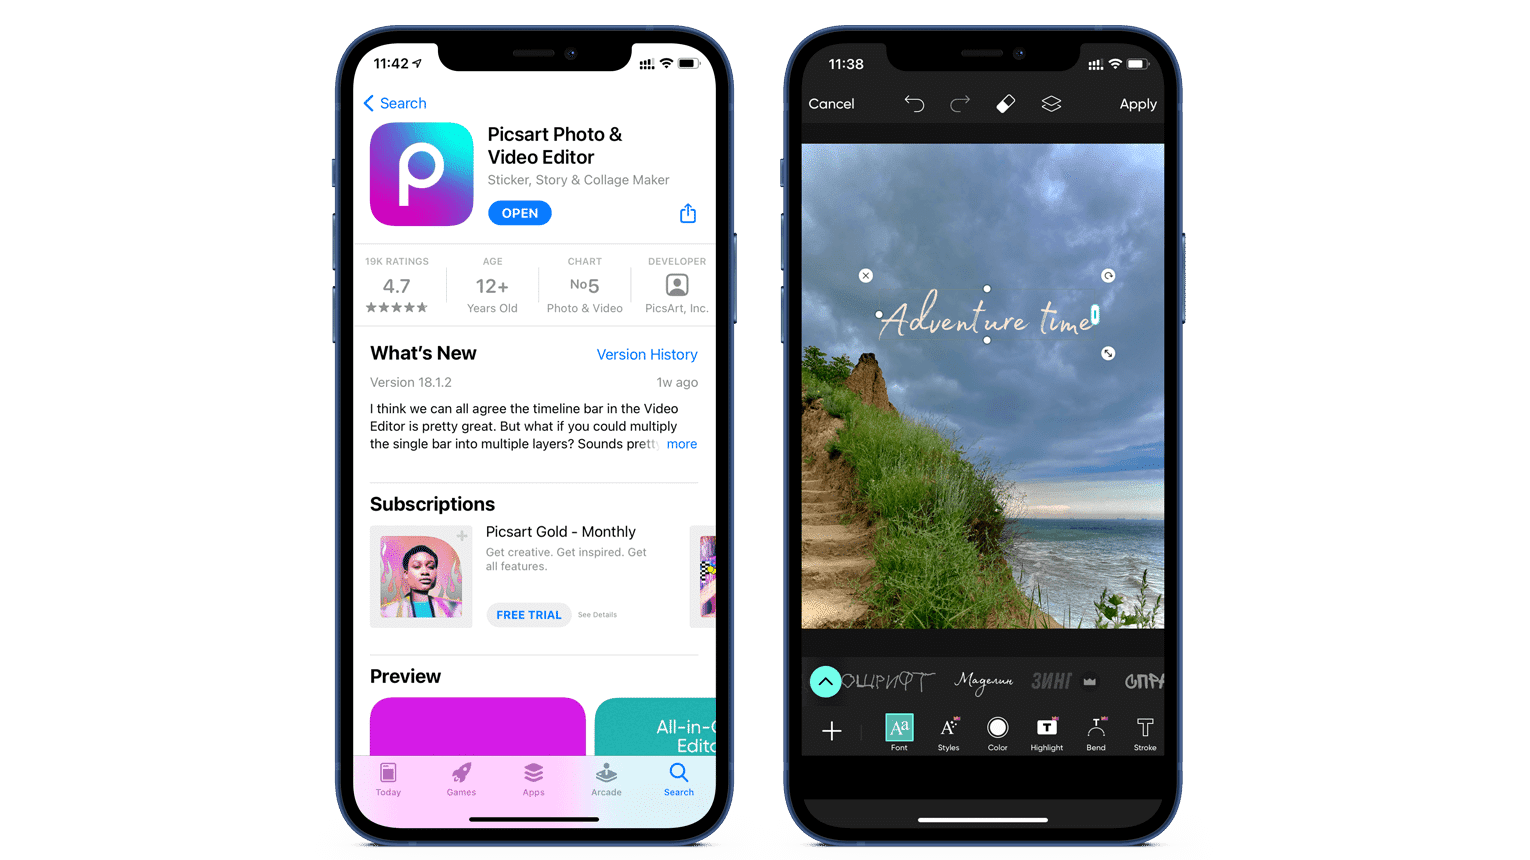 iPhone screens showing PicsArt photo editor in App store